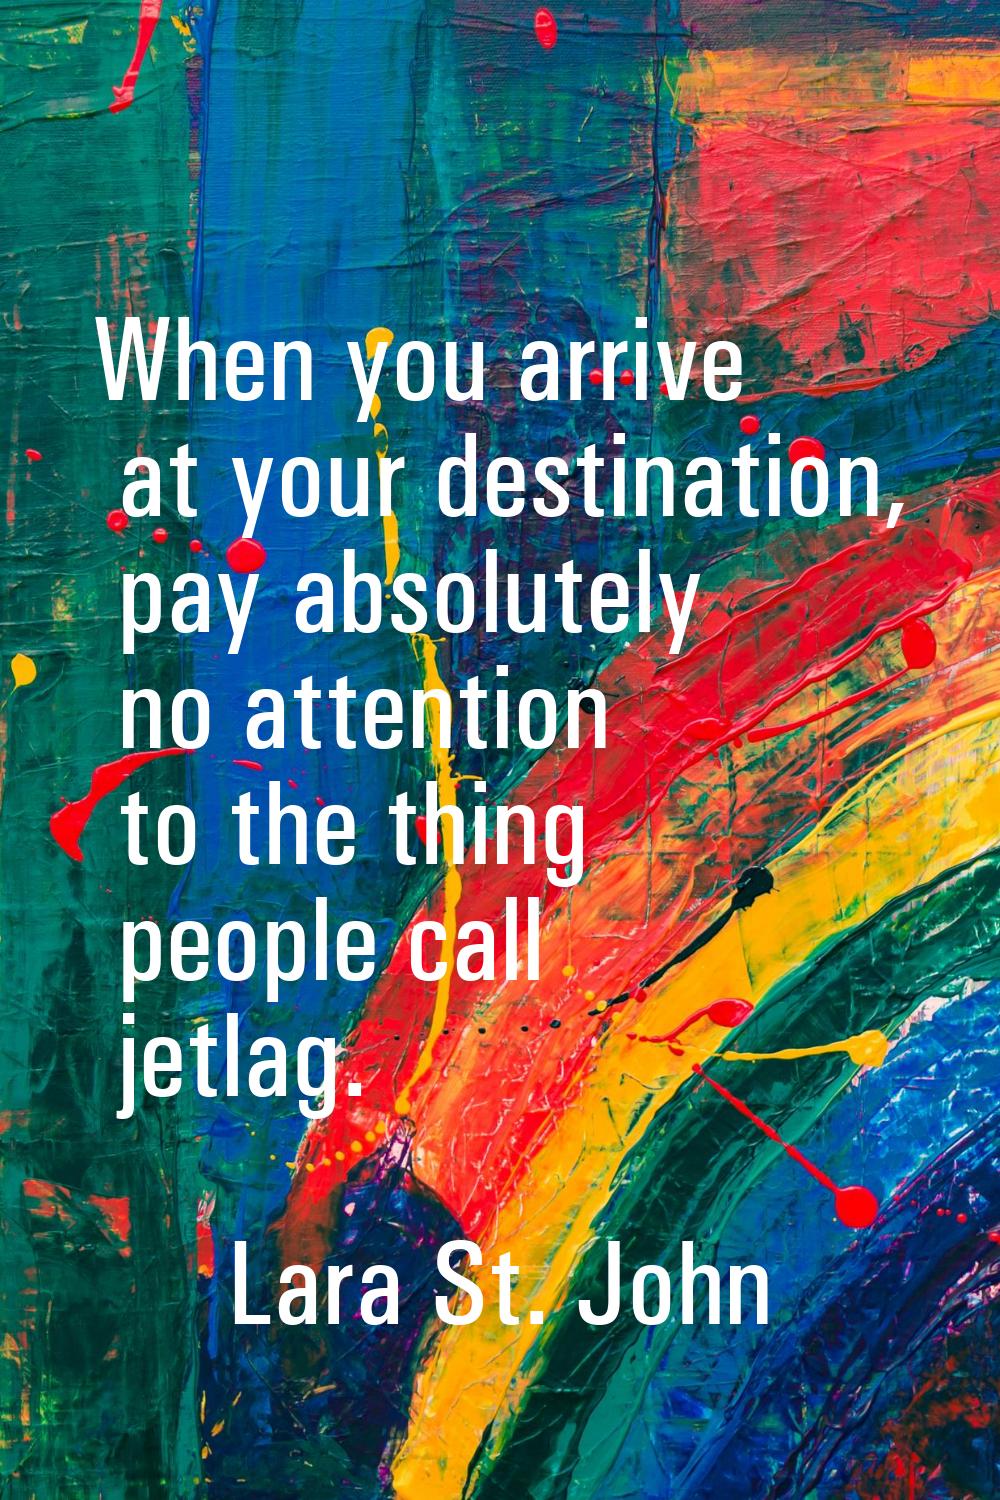 When you arrive at your destination, pay absolutely no attention to the thing people call jetlag.